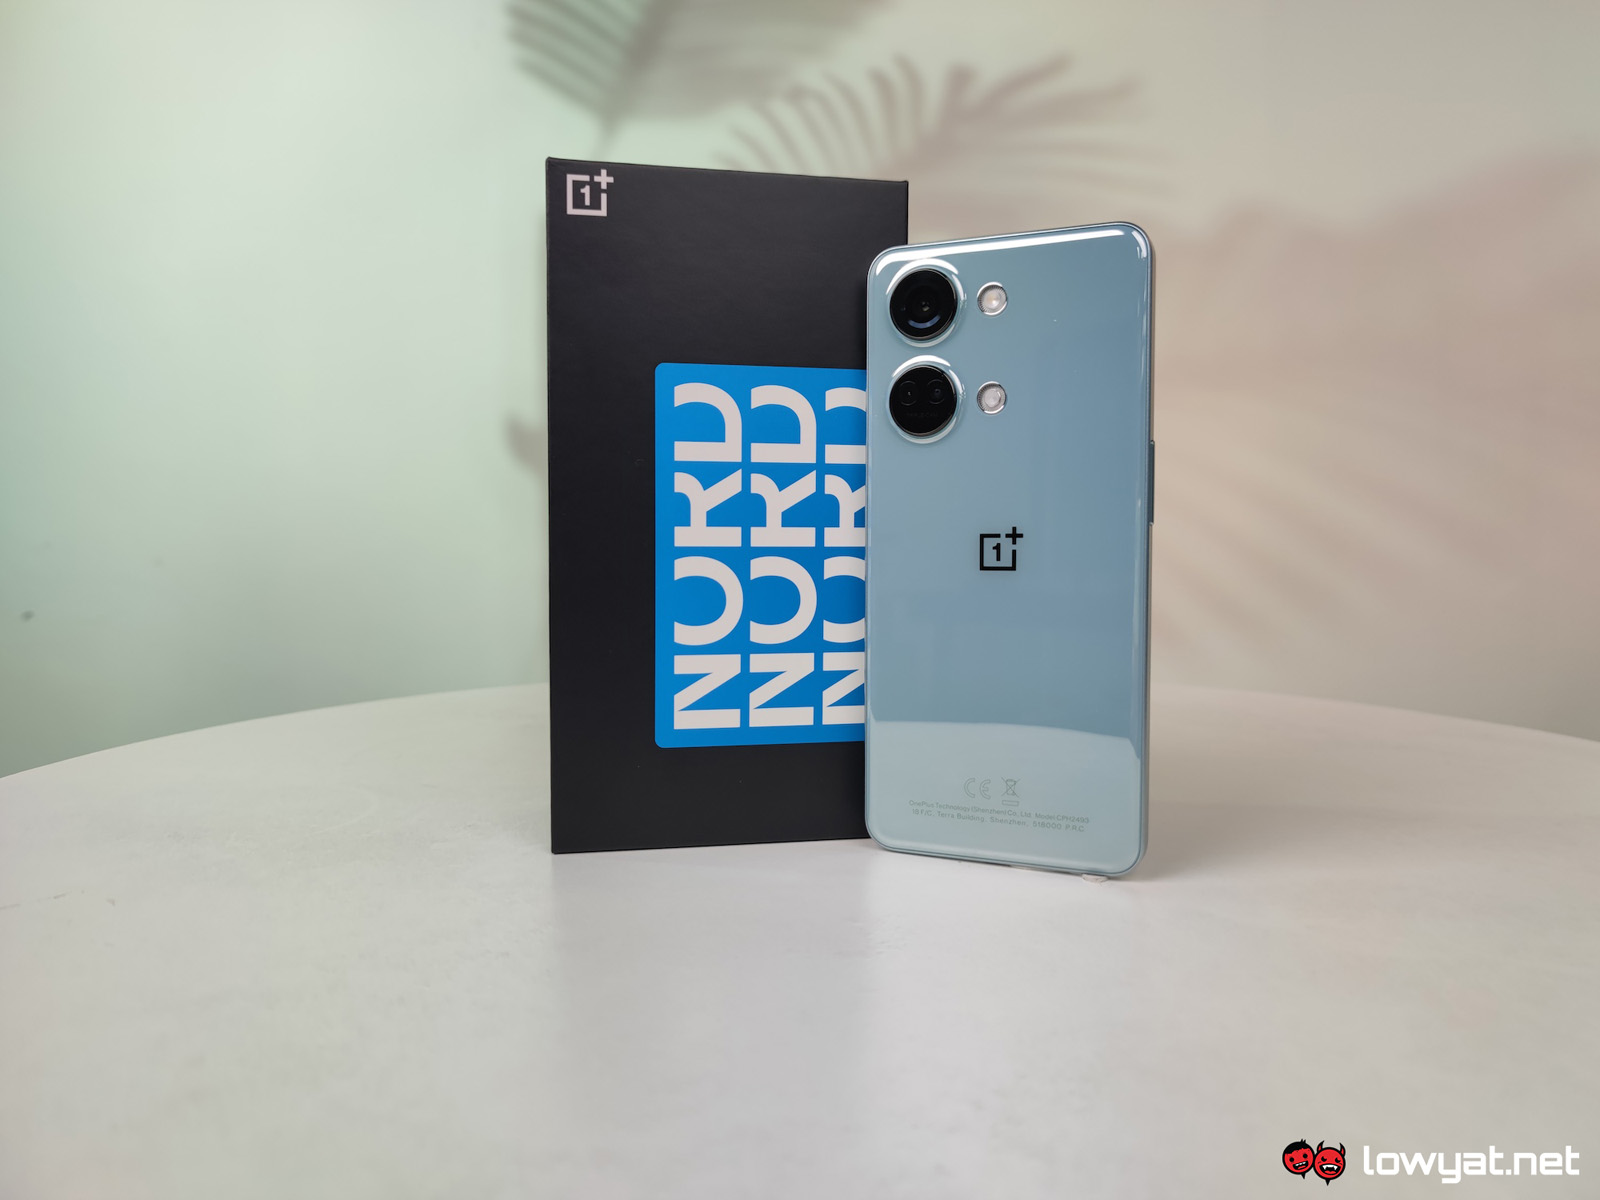 OnePlus Nord 3 Full Review! 